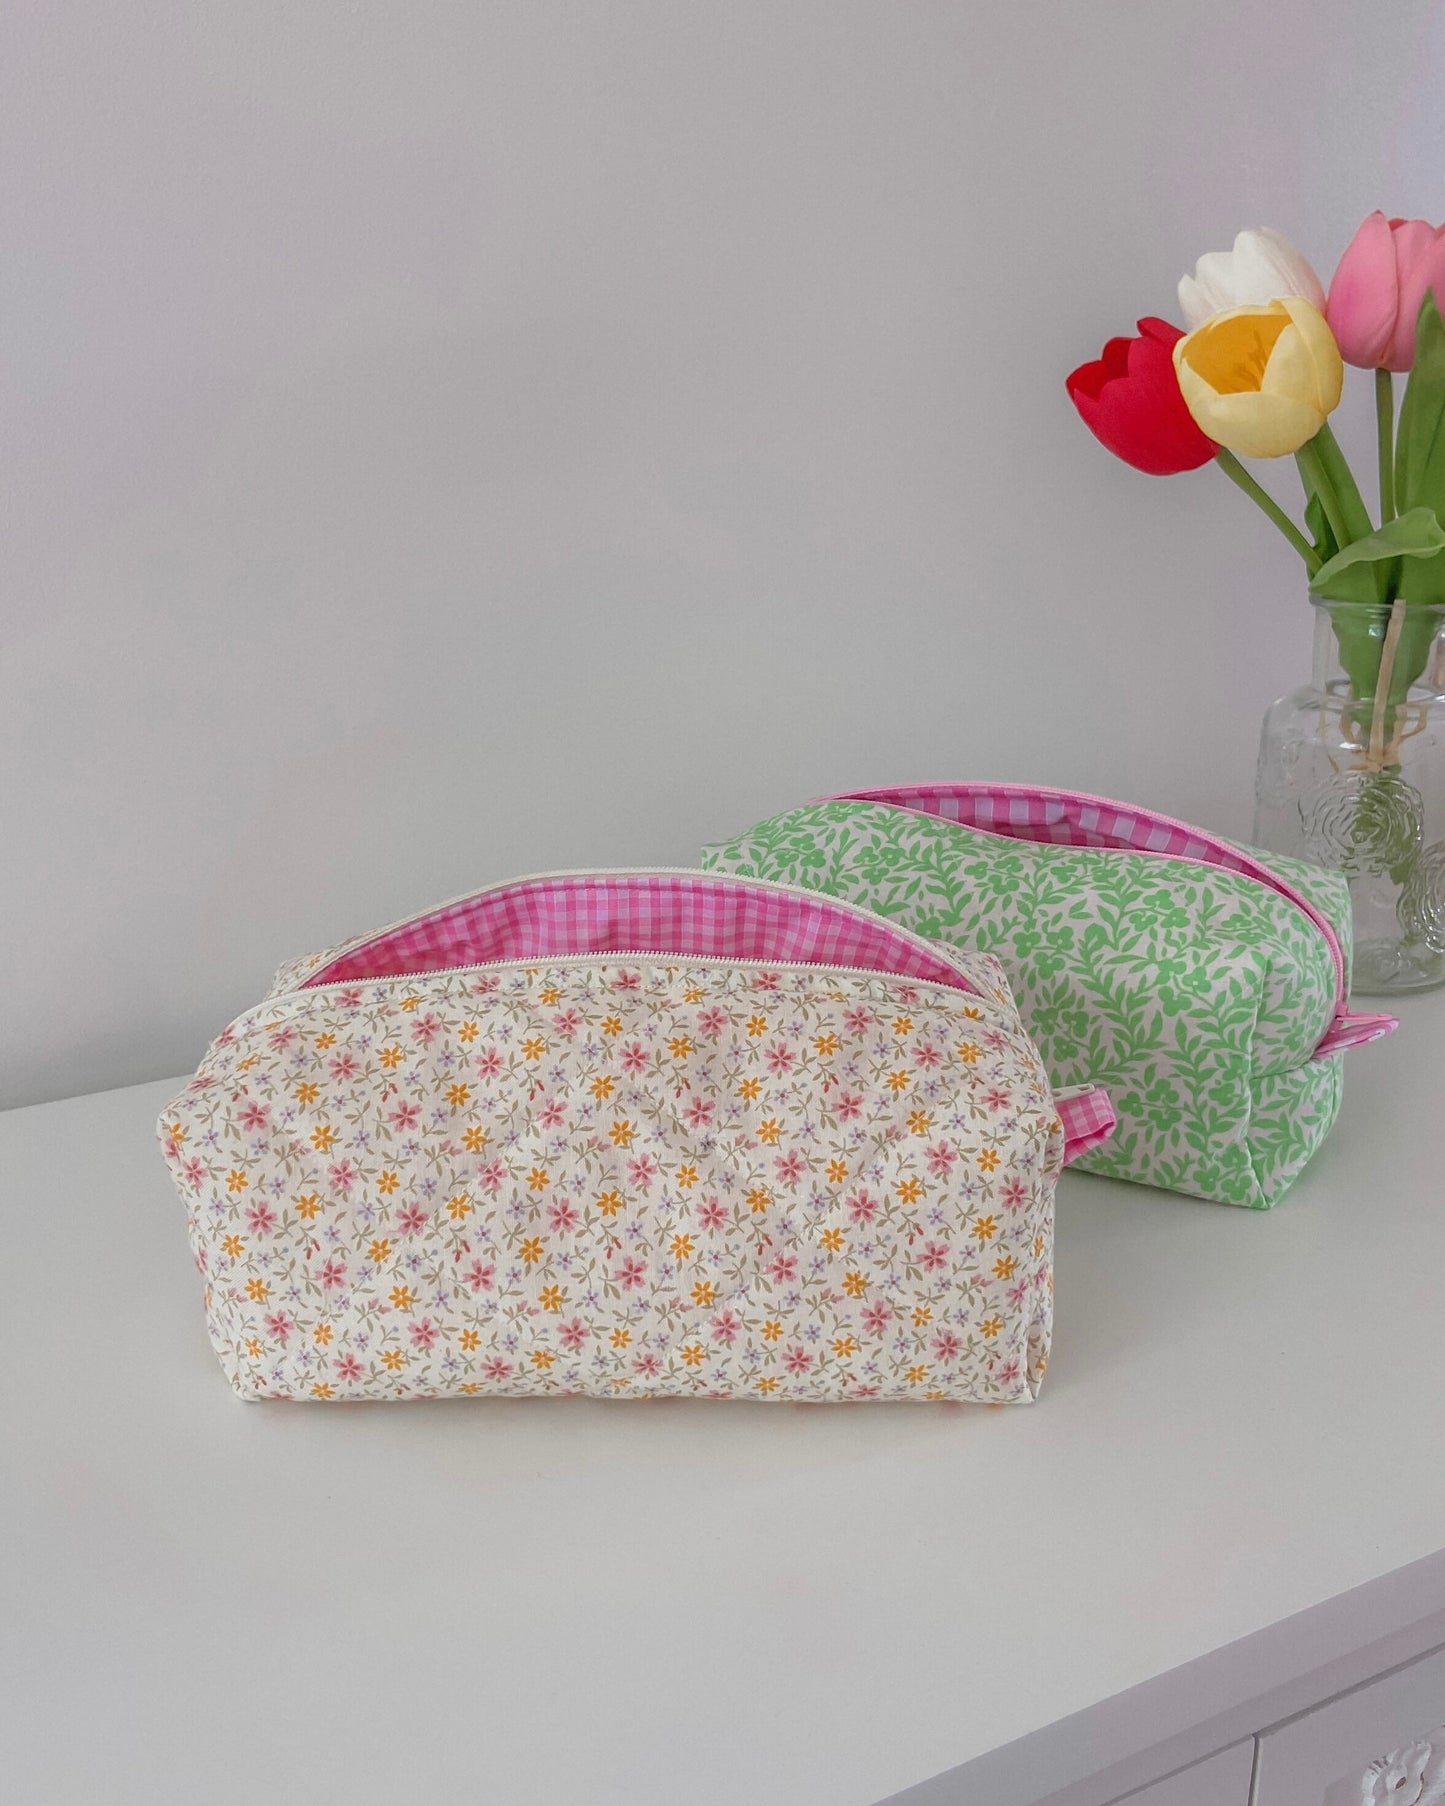 FLORAL MAKEUP BAG medium yellow ditsy floral quilted cosmetic bag pink gingham, cotton zip-up pouch, make-up bag handmade in U.K.